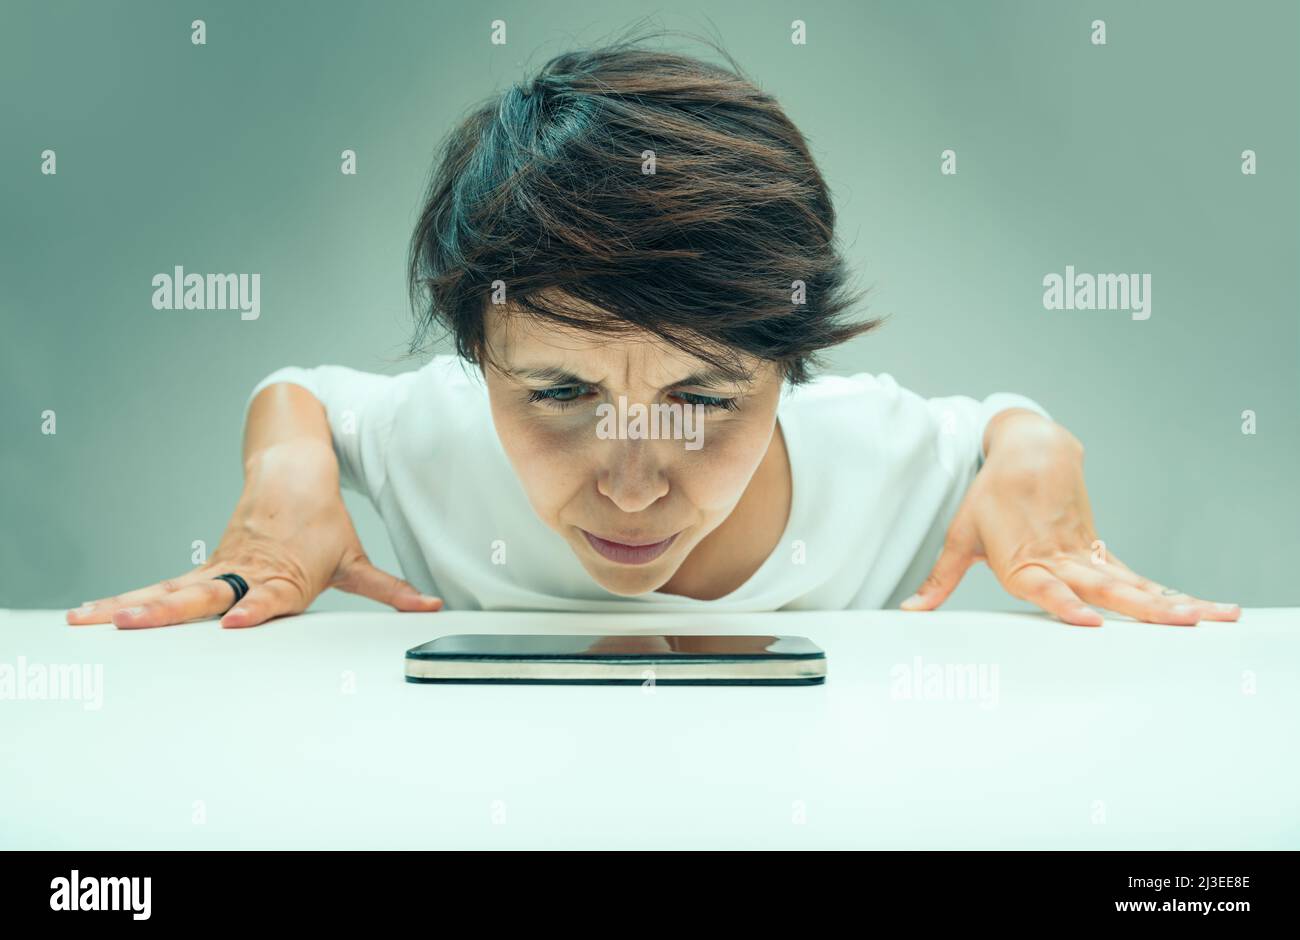 woman looks suspiciously at her cell phone up close, doesn't trust technology because nothing ever works and is afraid of viruses and threats from the Stock Photo